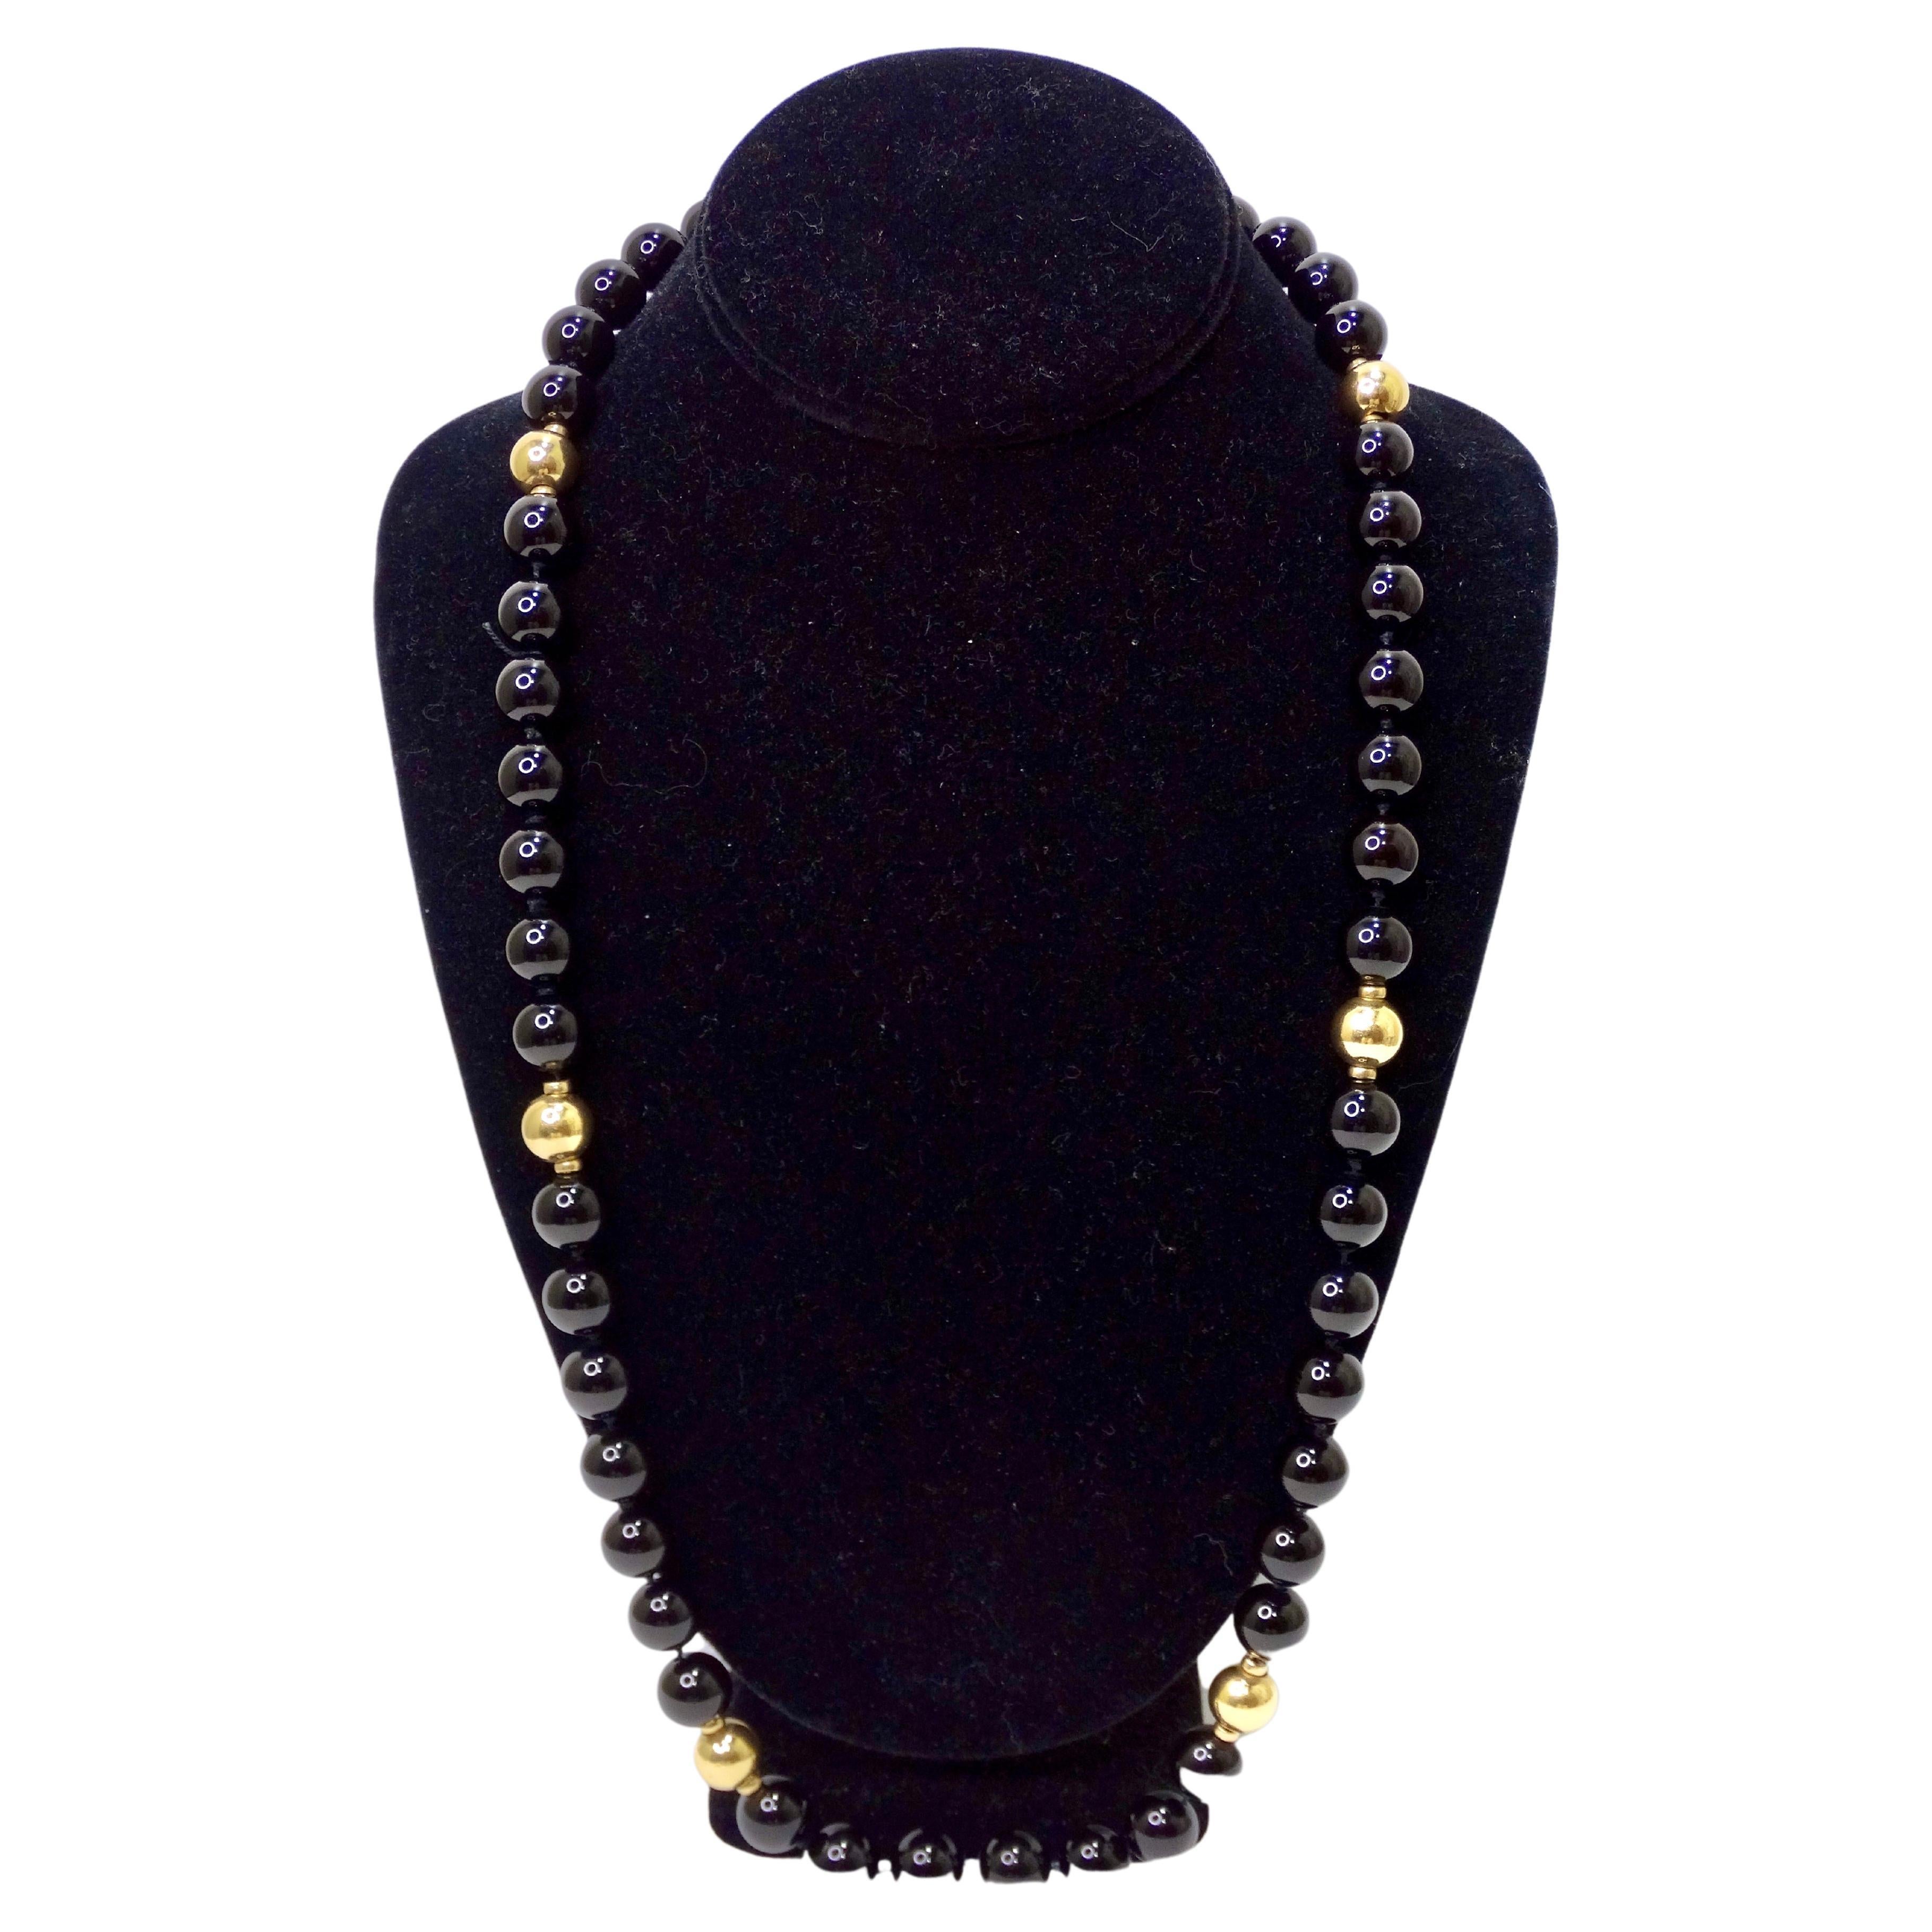 Onyx 14k Gold and Black Beaded Necklace